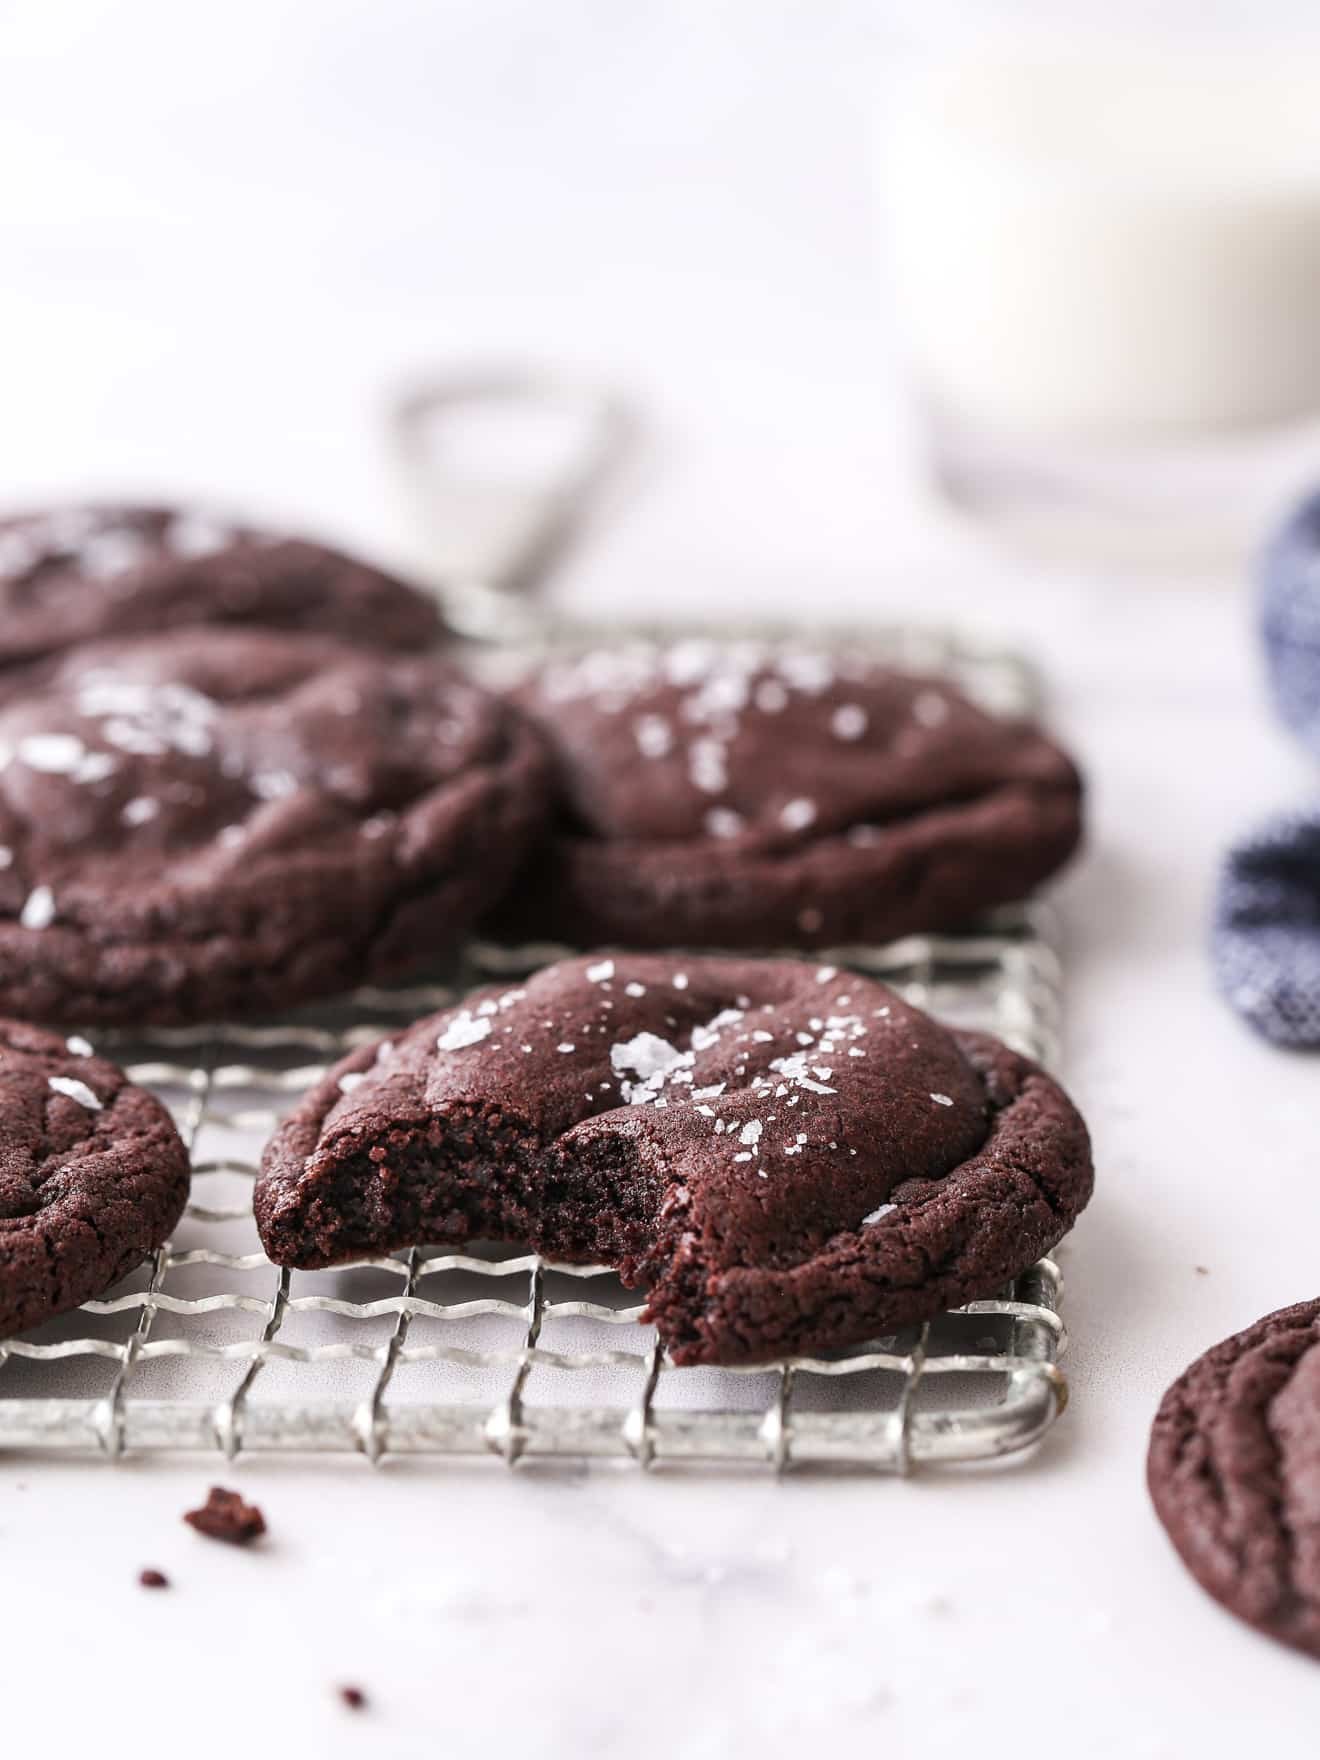 https://www.completelydelicious.com/wp-content/uploads/2021/01/chewy-chocolate-cookies-8.jpg